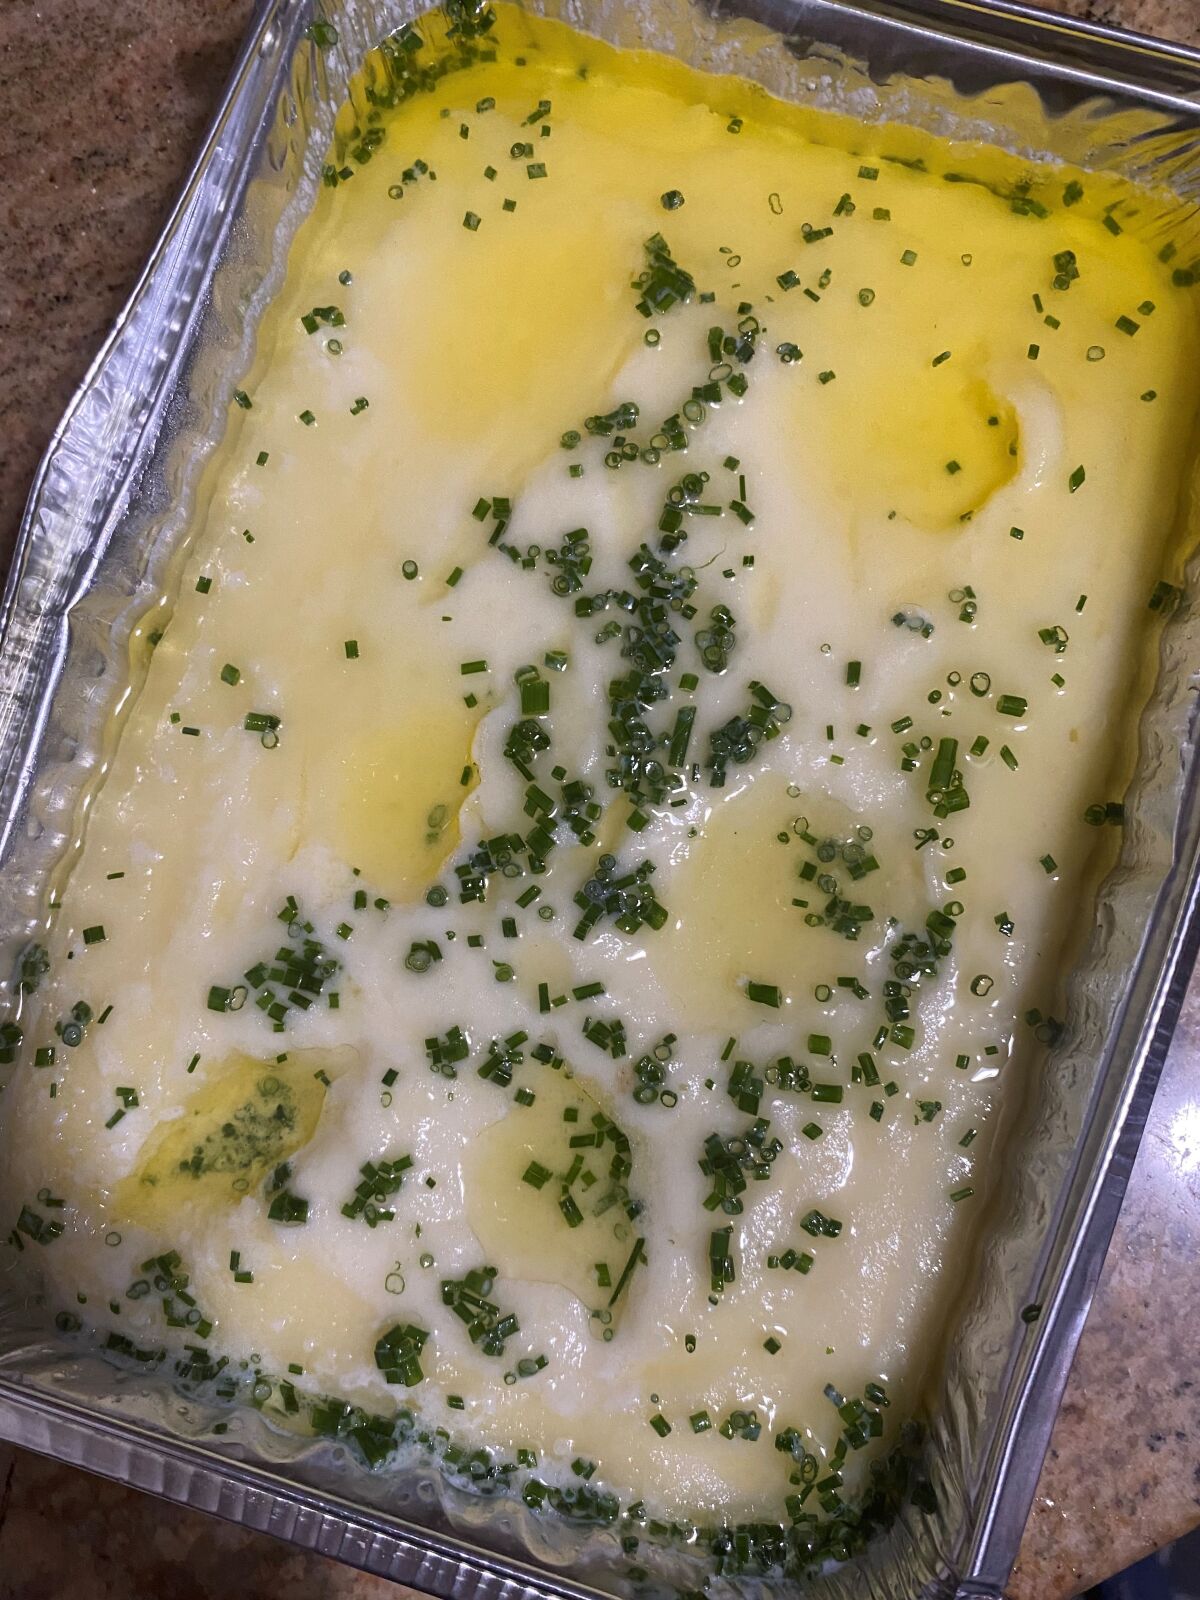 Mashed potatoes from Herb & Sea.